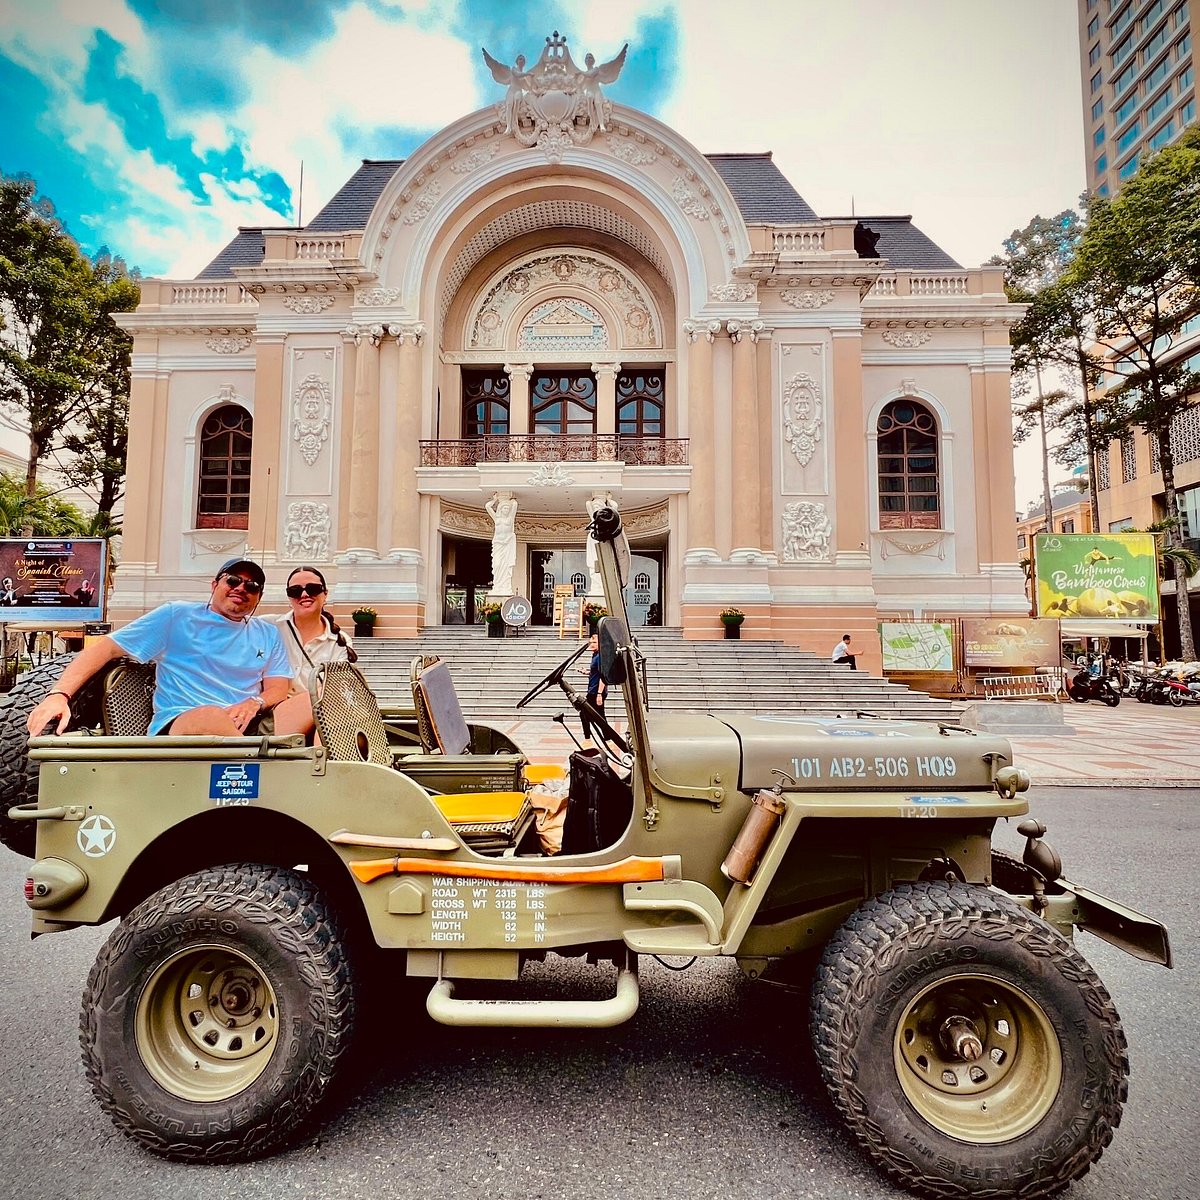 Ho Chi Minh City Travel Guide  All You Need to Know for Your First Visit